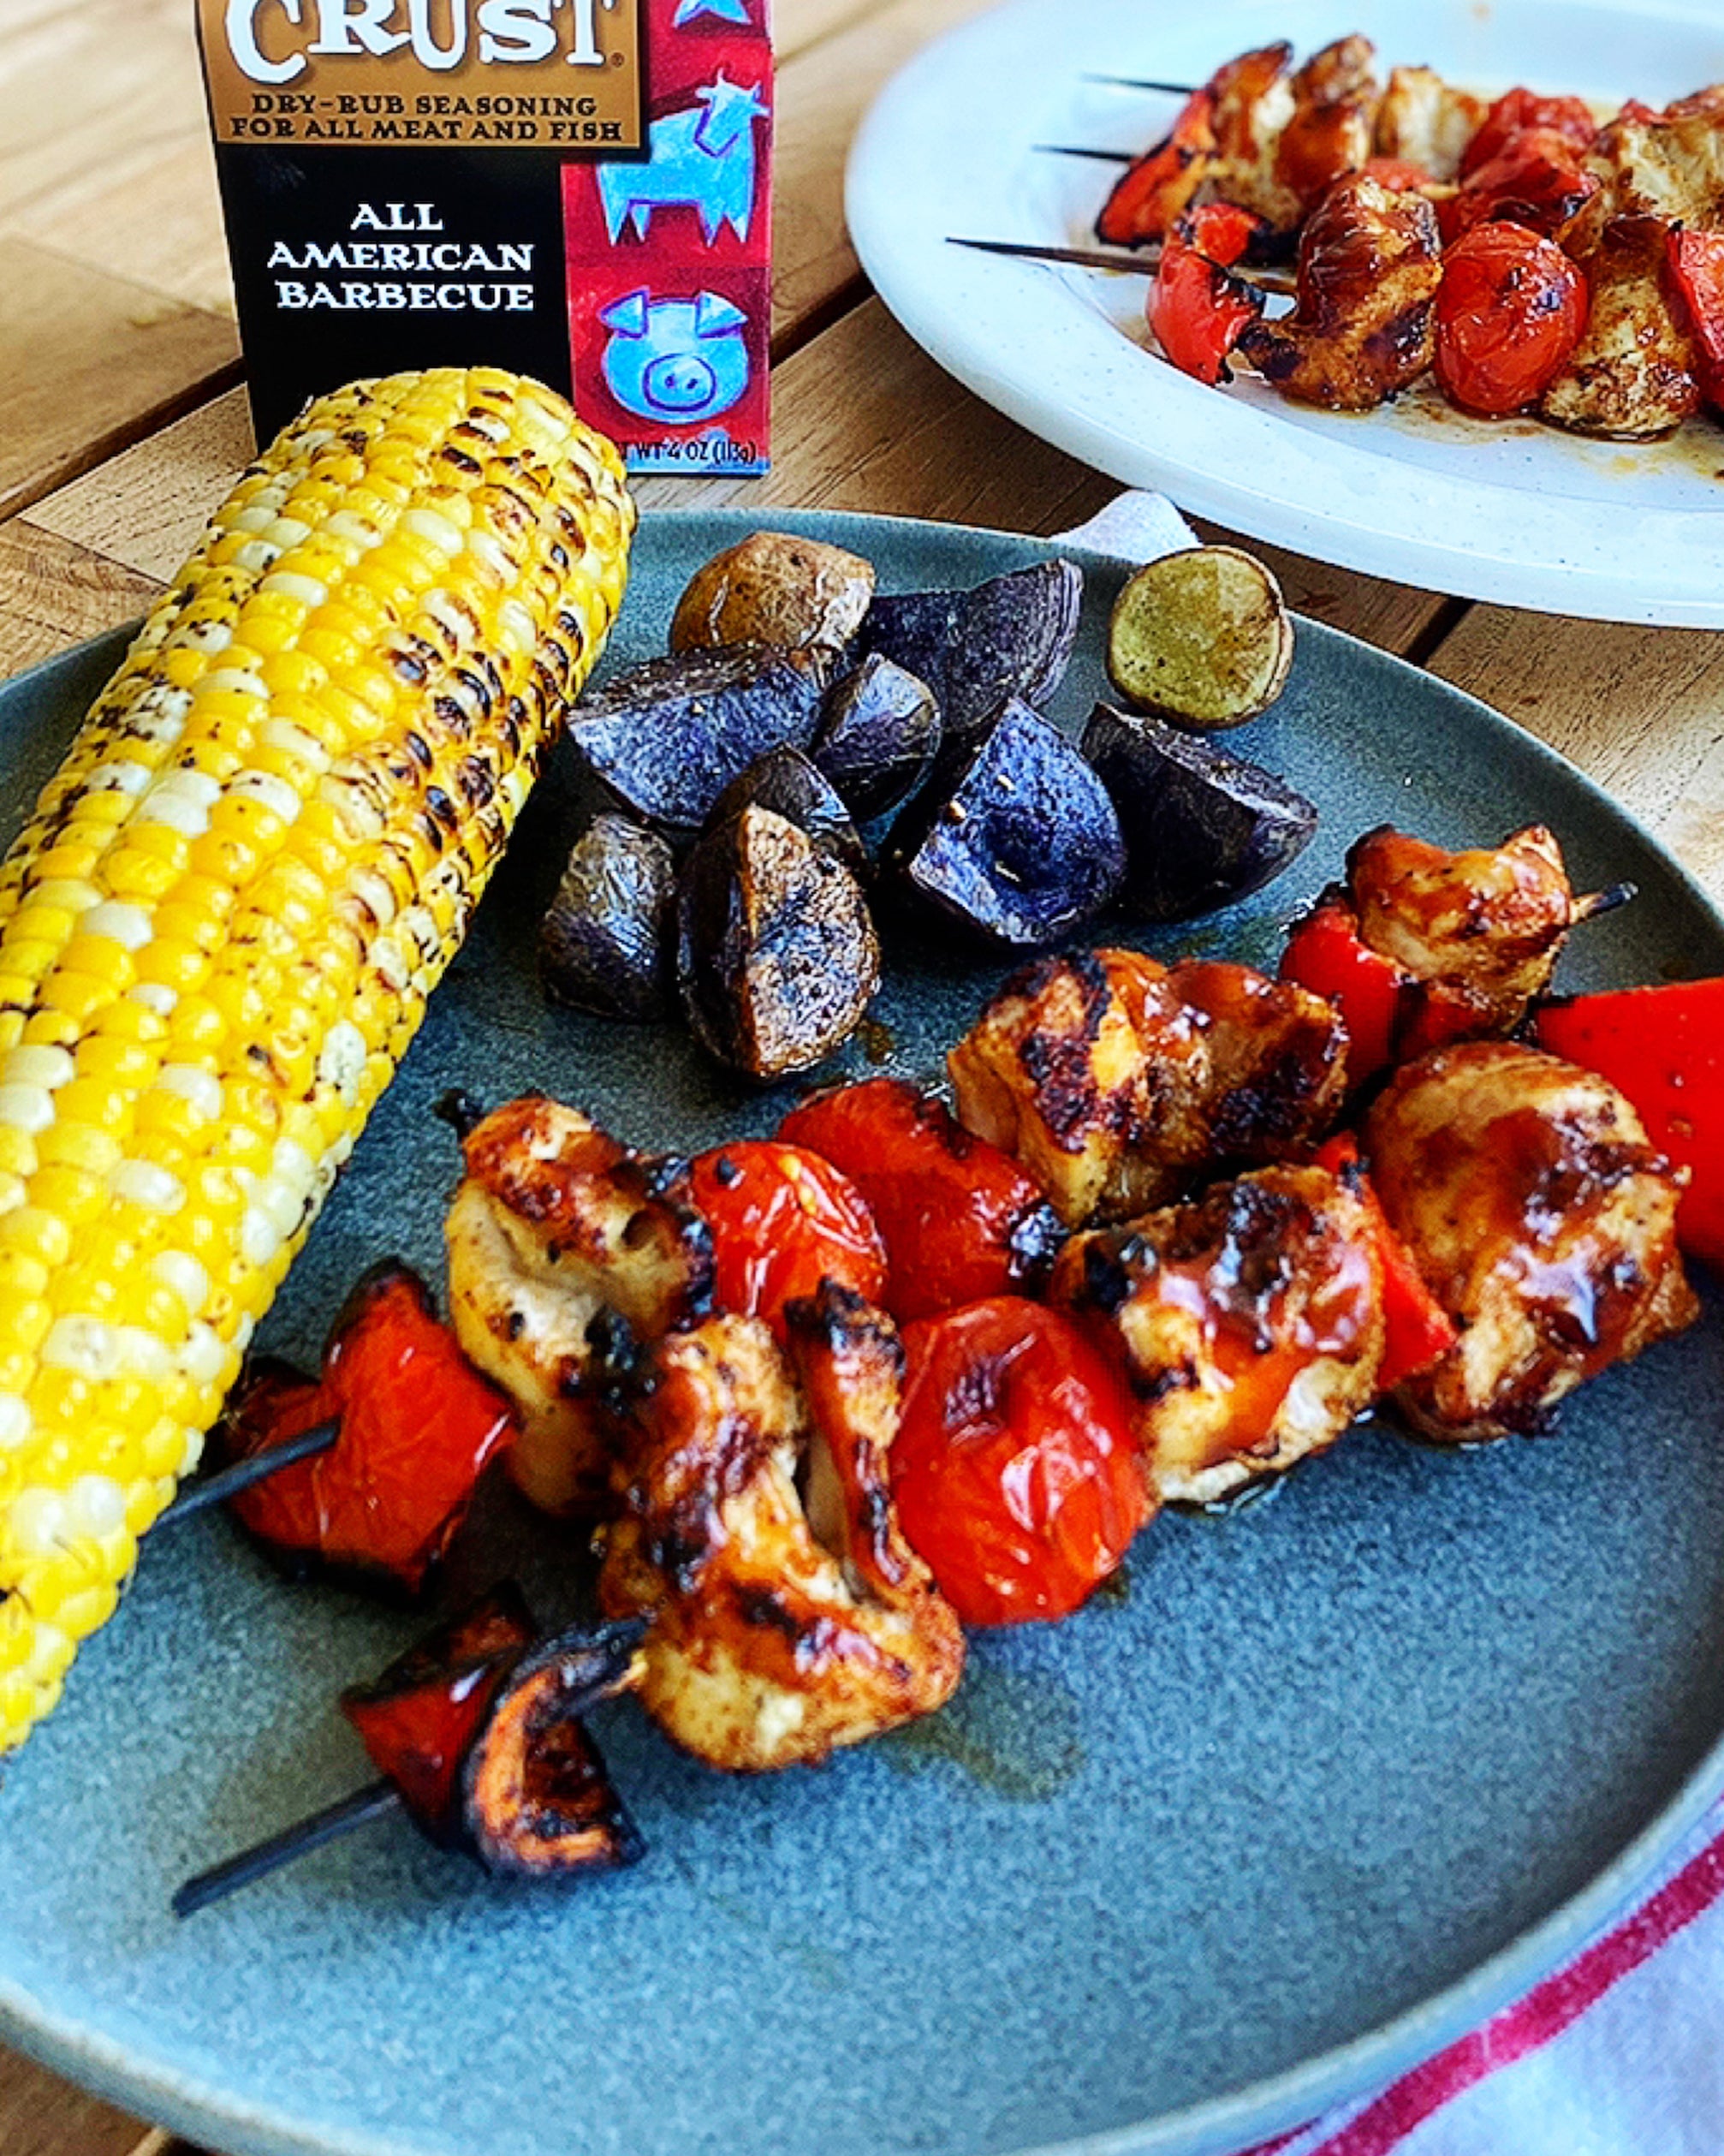 Char Crust® All American Barbecue chicken kabobs on a plate with corn and potatoes on the side.